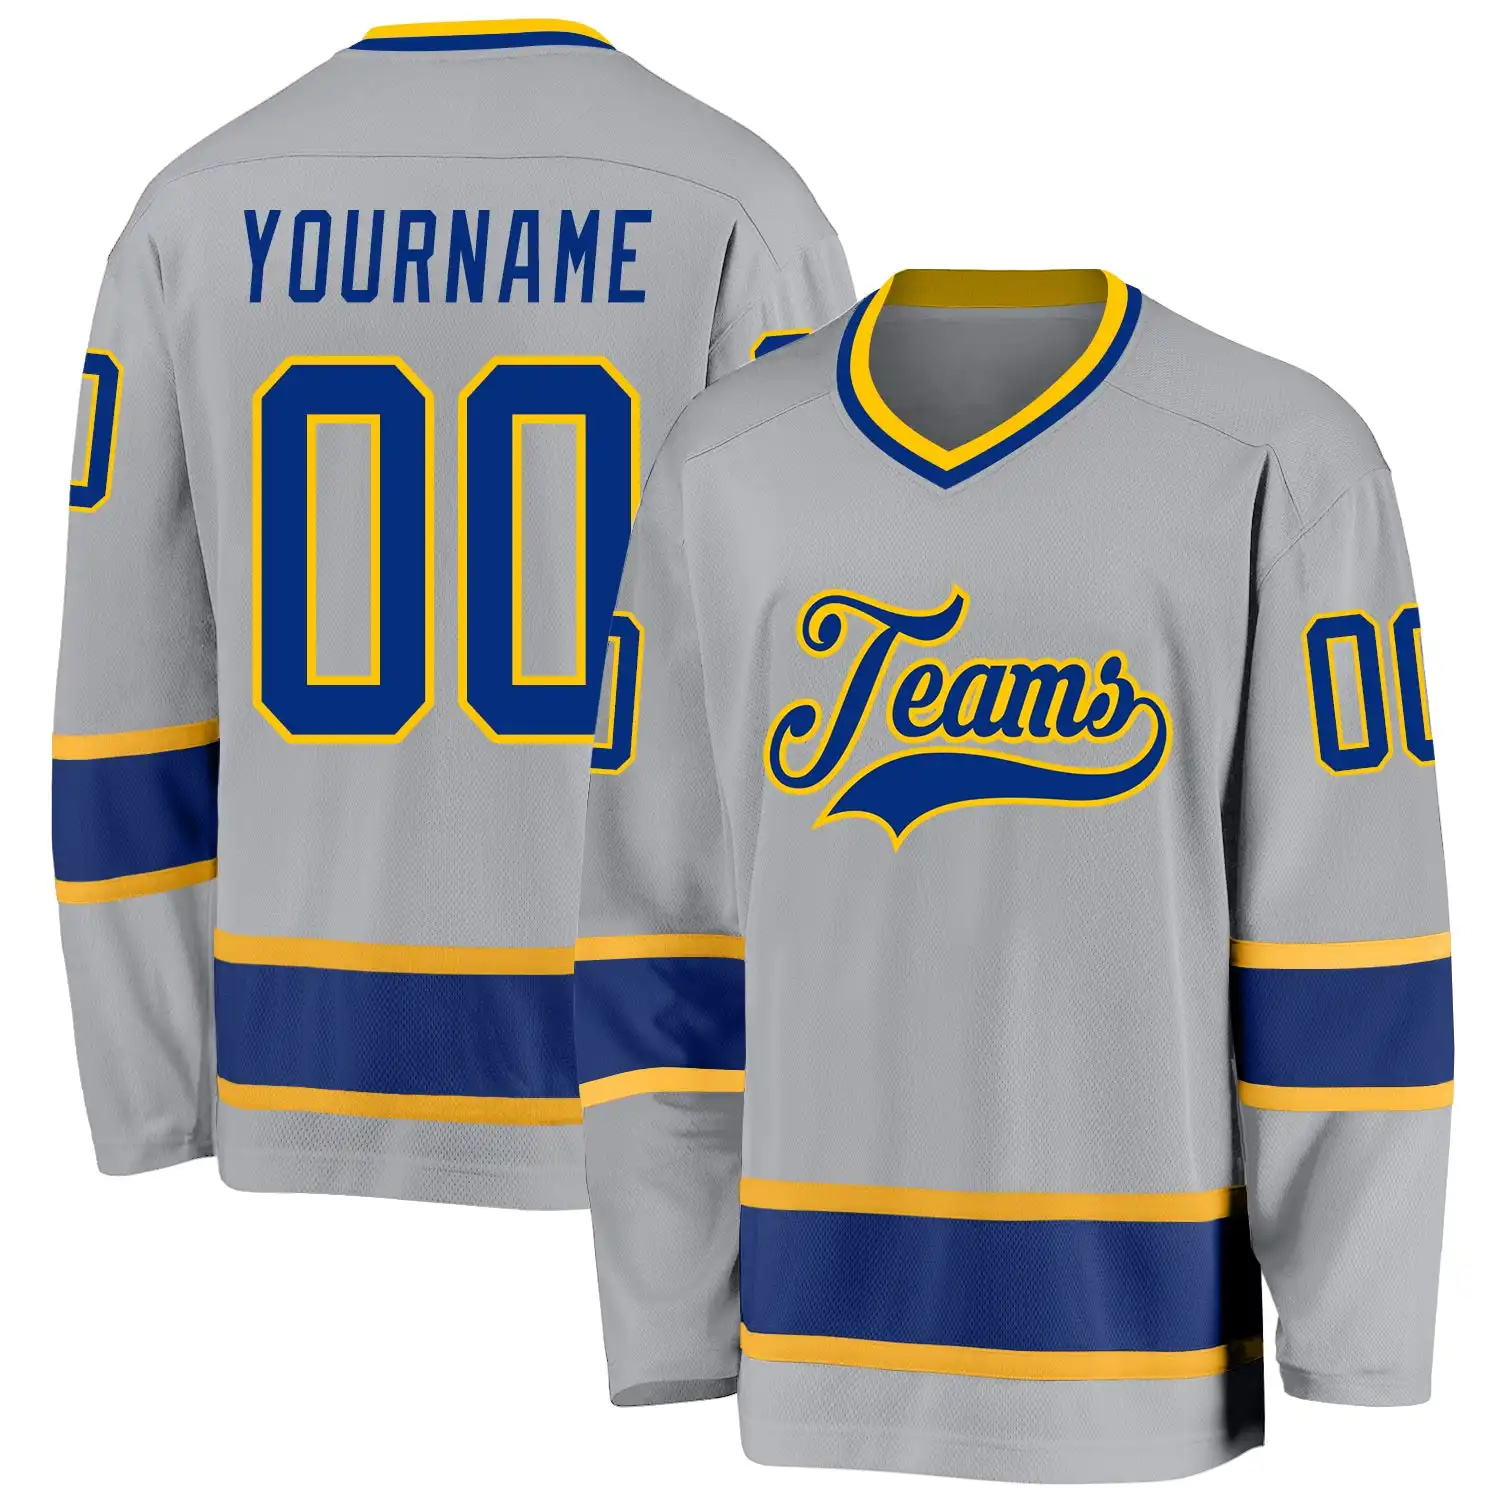 Stitched And Print Gray Royal-gold Hockey Jersey Custom